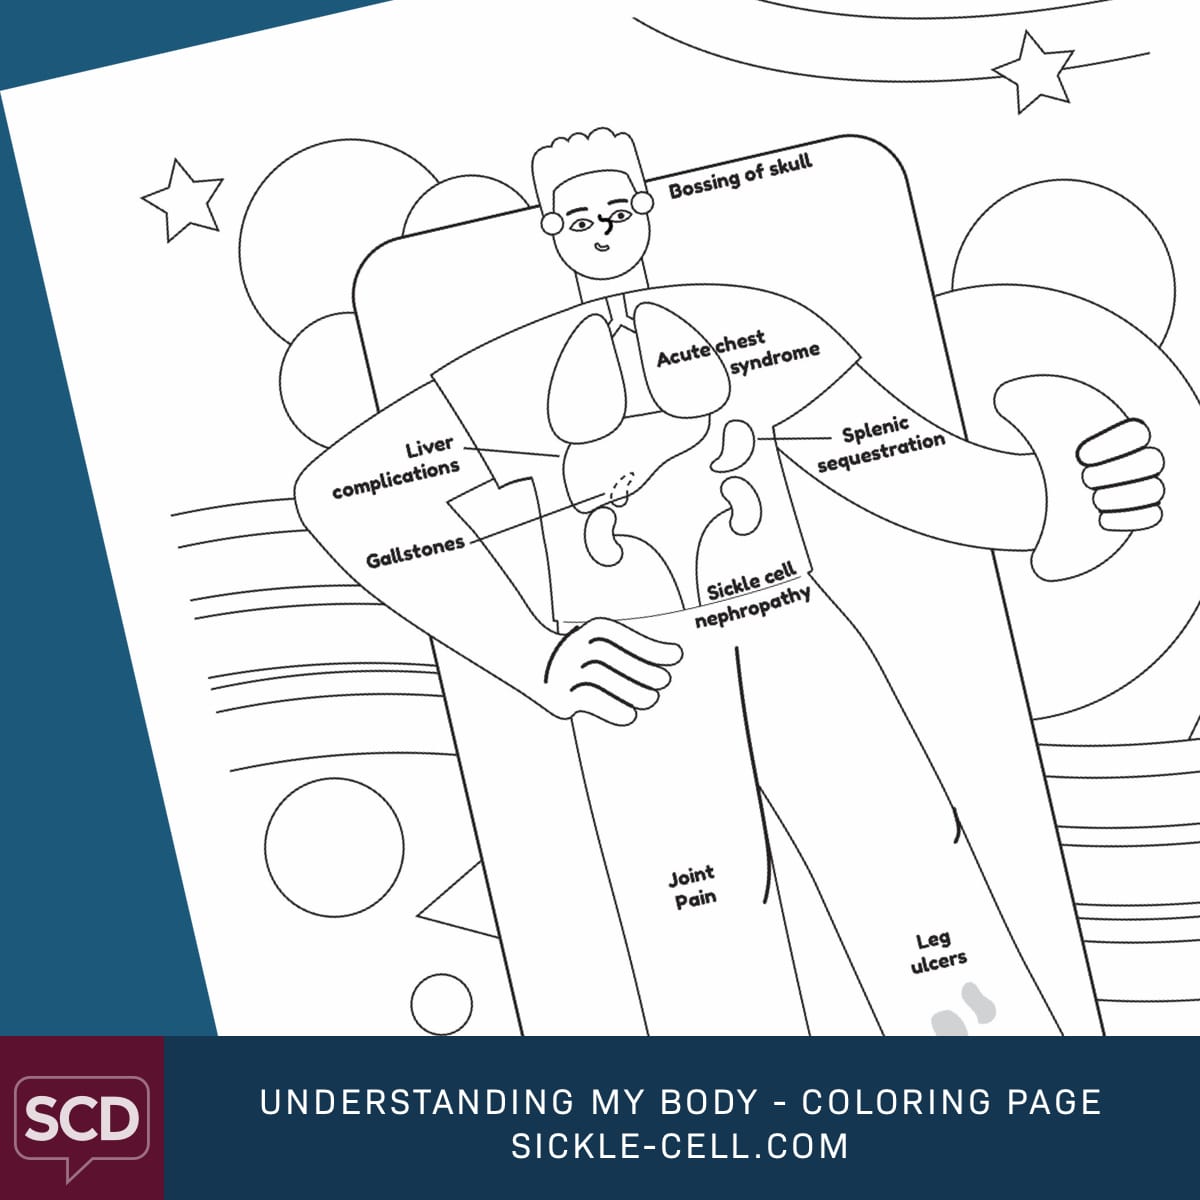 sickle-cell coloring page